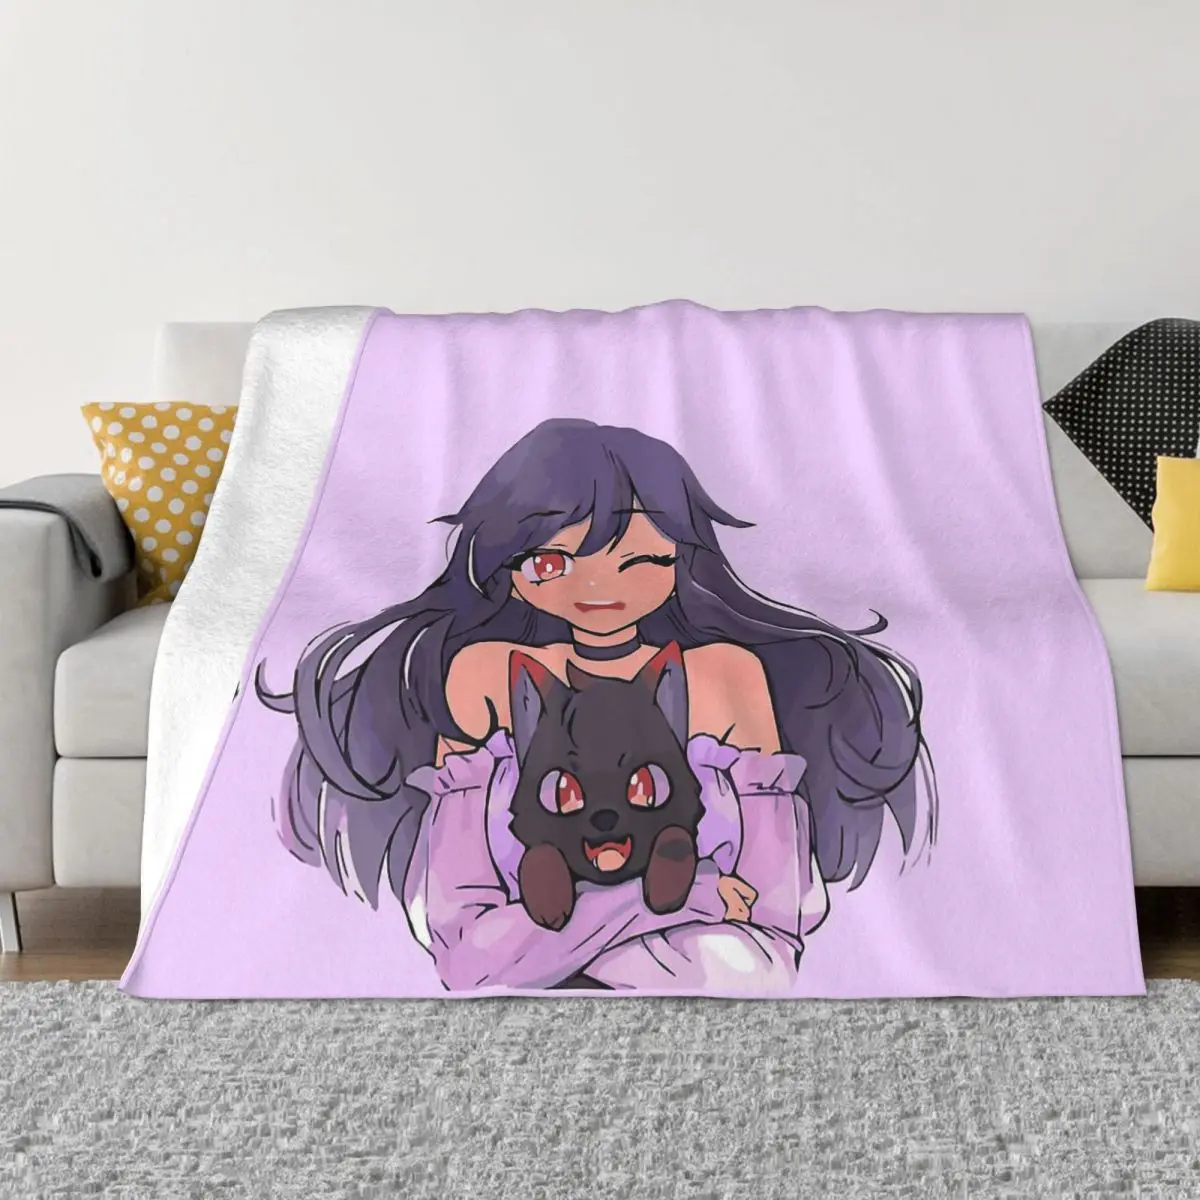 

Aphmau Popular Game Cute Game Characters Blanket Flannel Decoration Aphmau With Aaron Dog Portable Home Bedspread